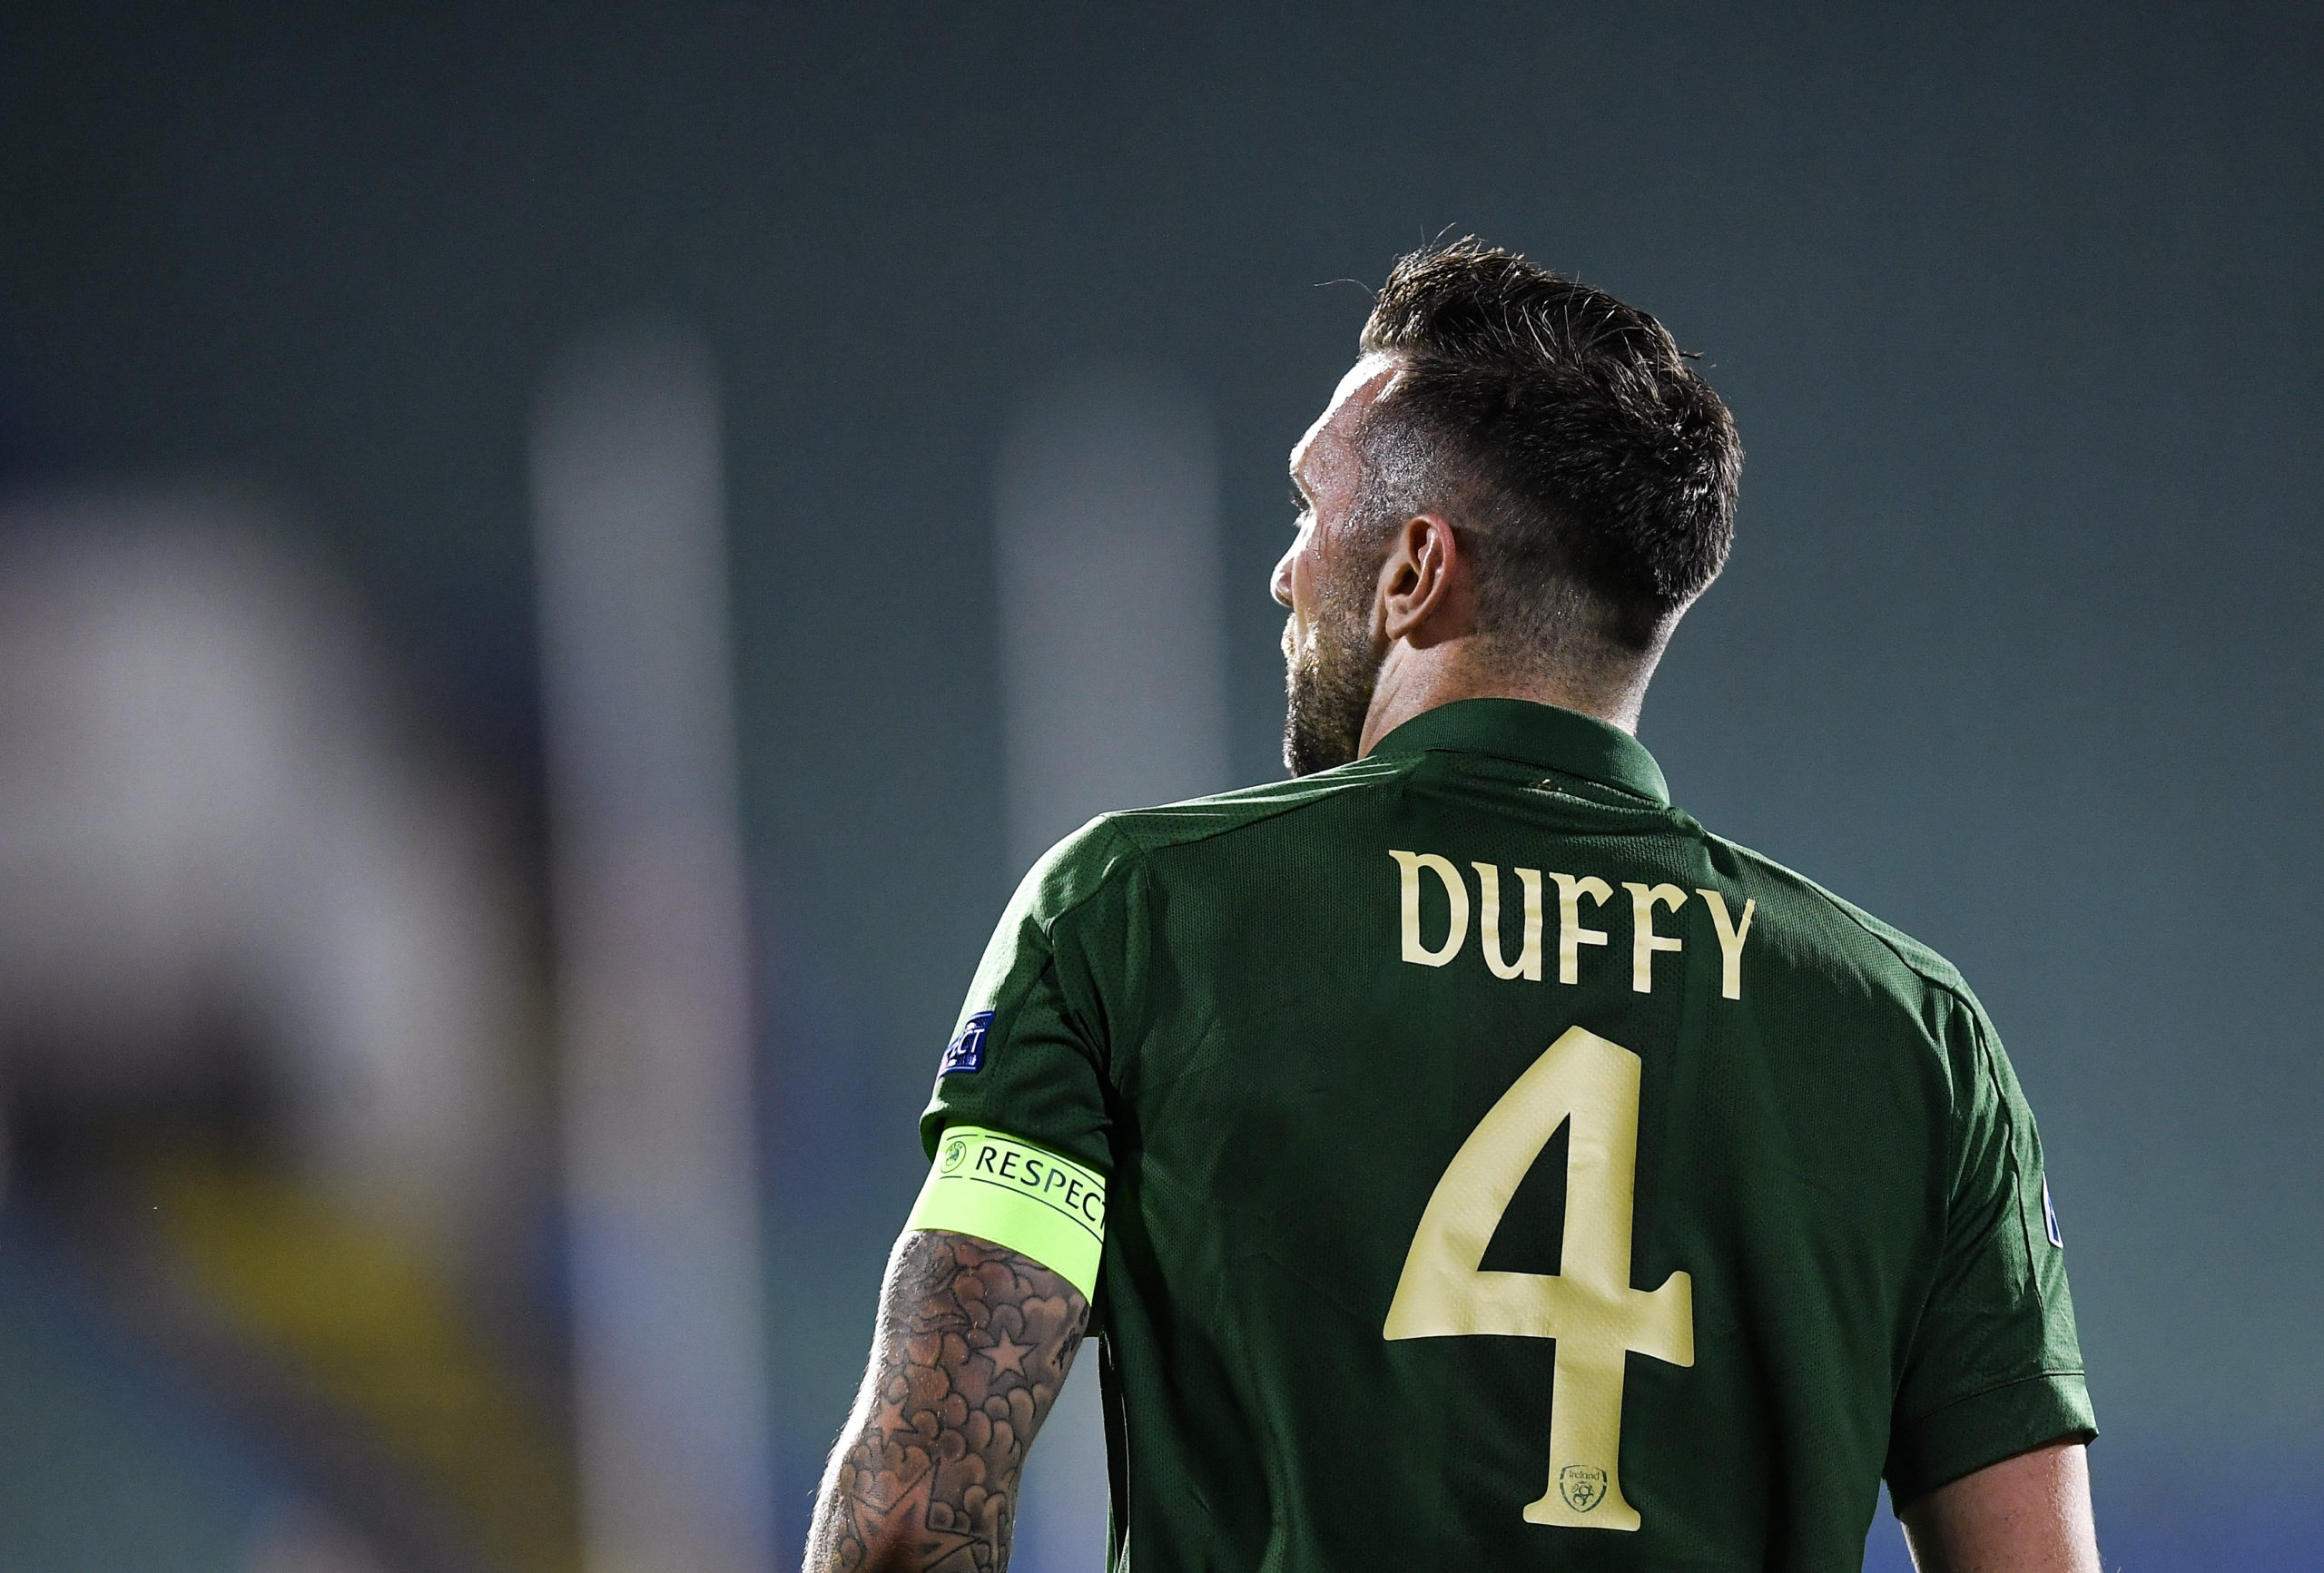 Brighton assistant manager Billy Reid hails Celtic's "incredible signing" Shane Duffy